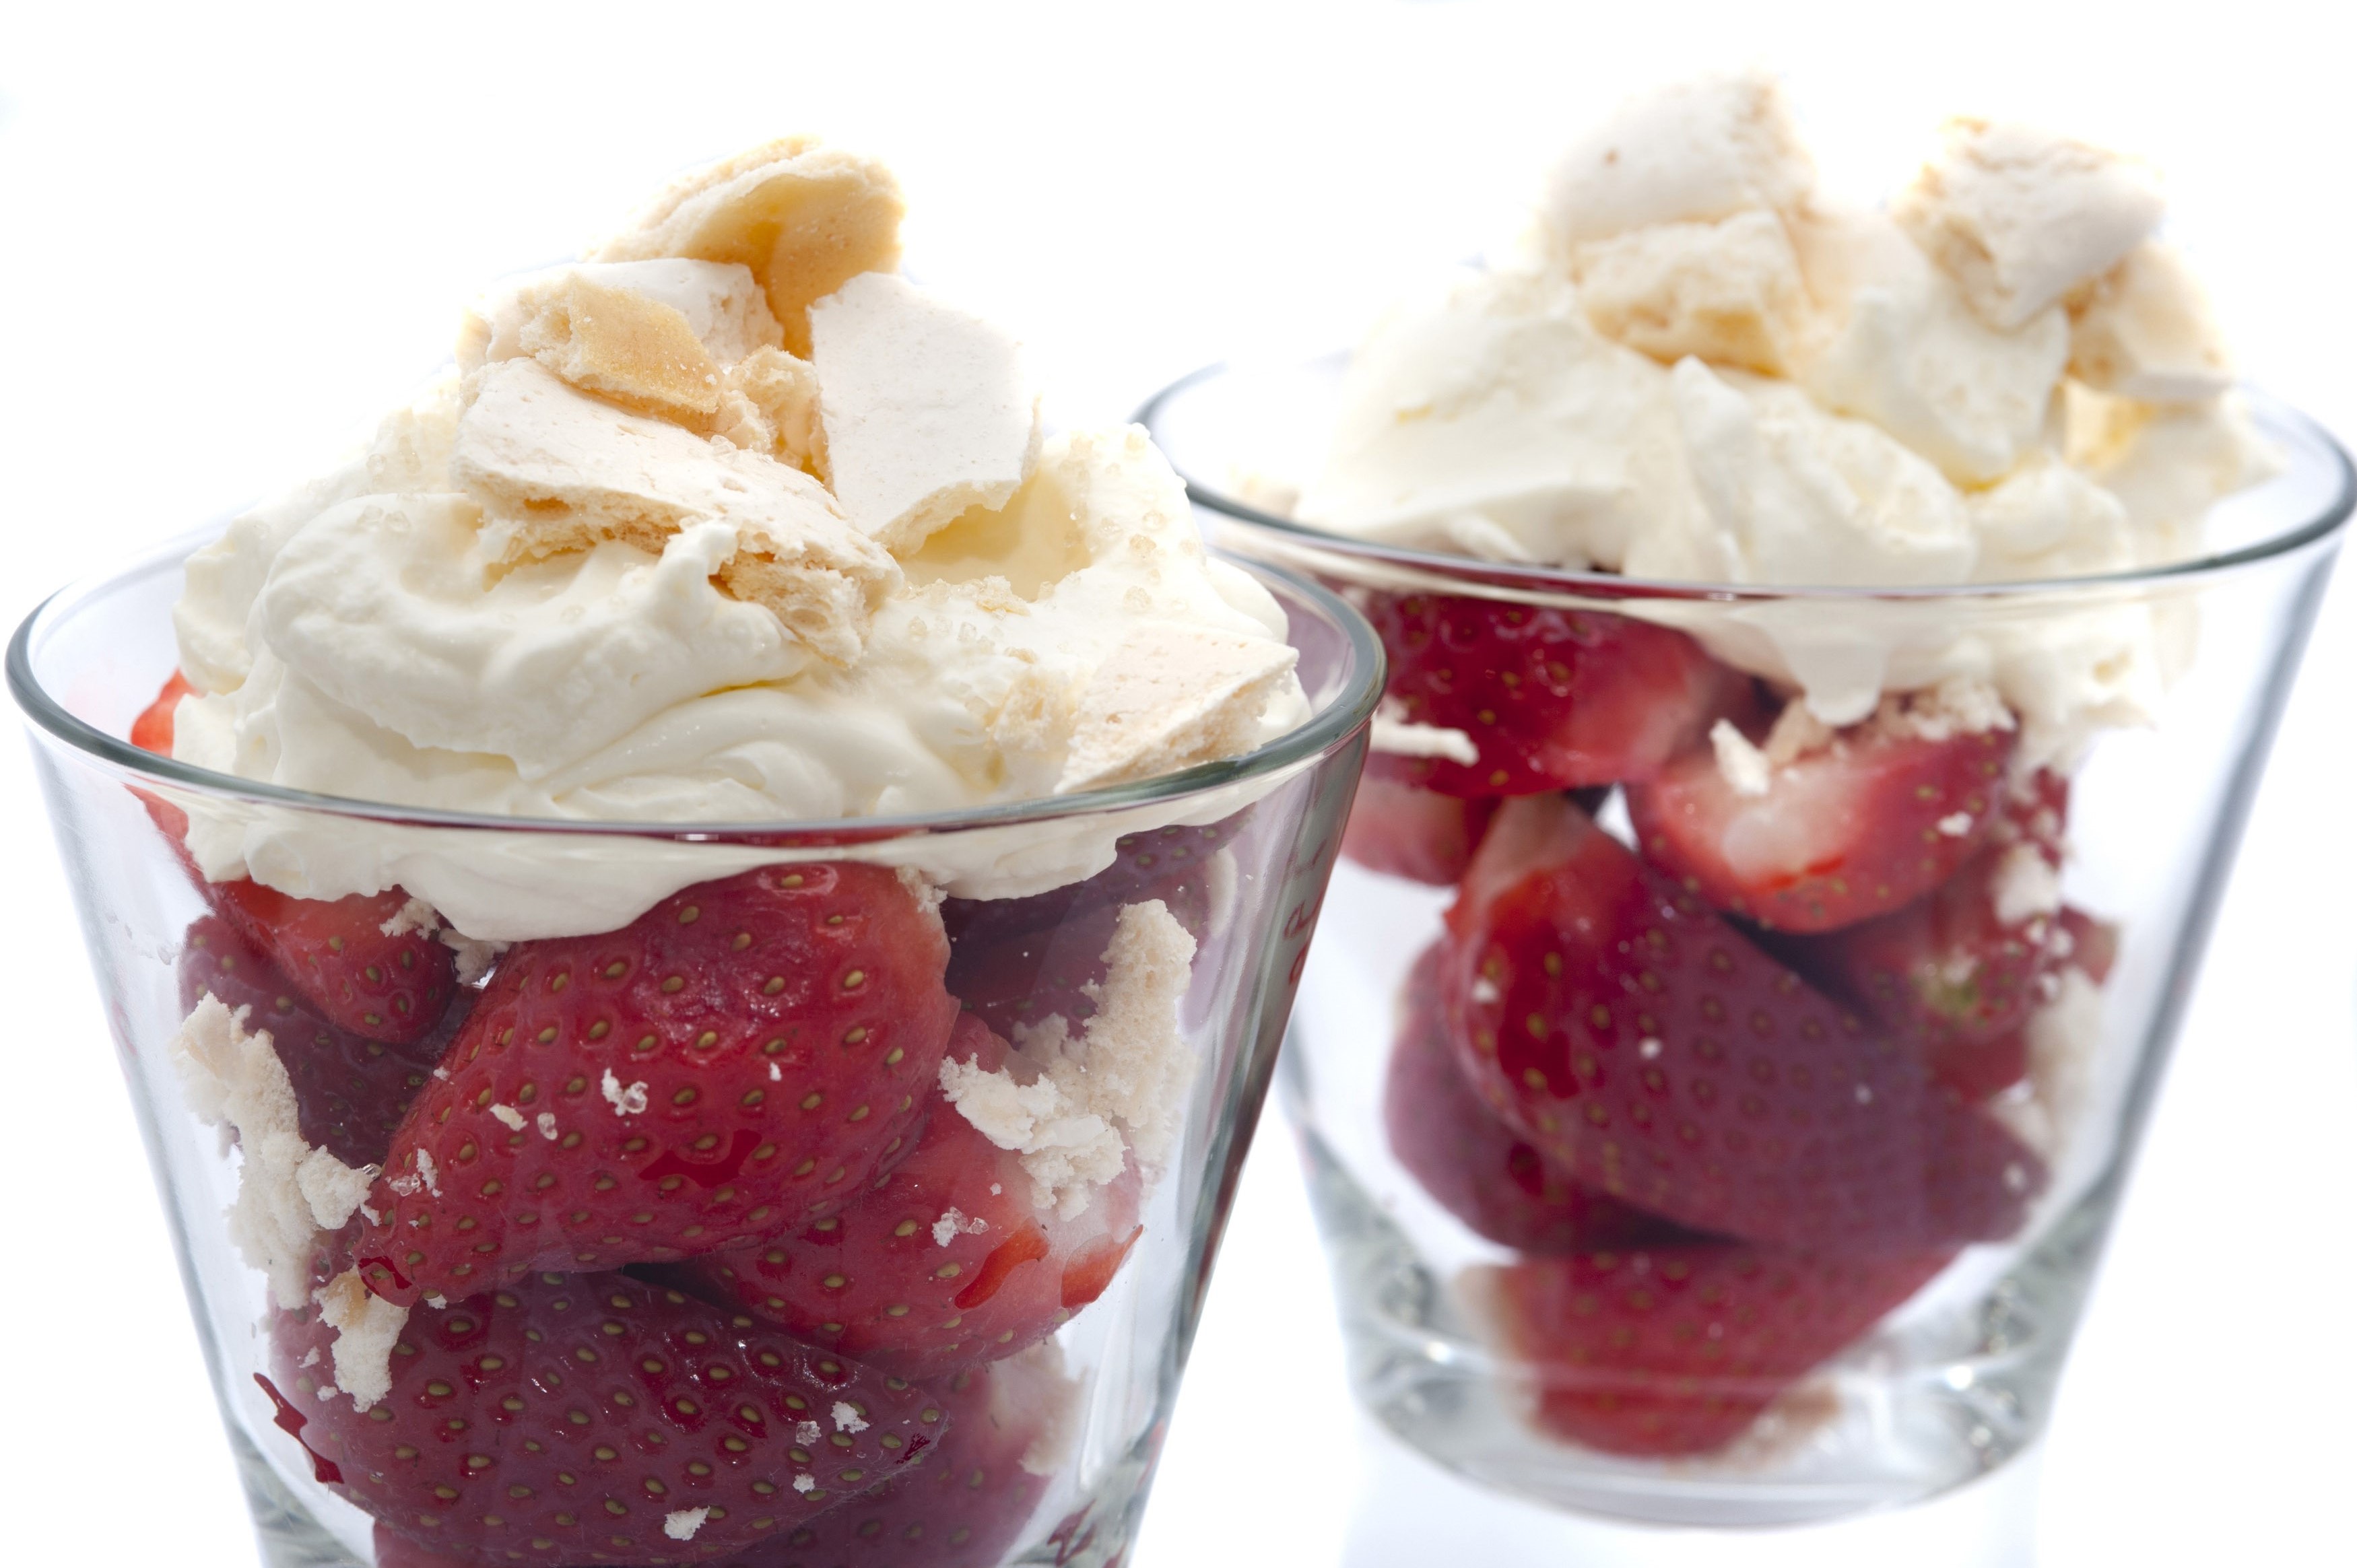 http://freefoodphotos.com/imagelibrary/confectionery/slides/strawberries_cream.html